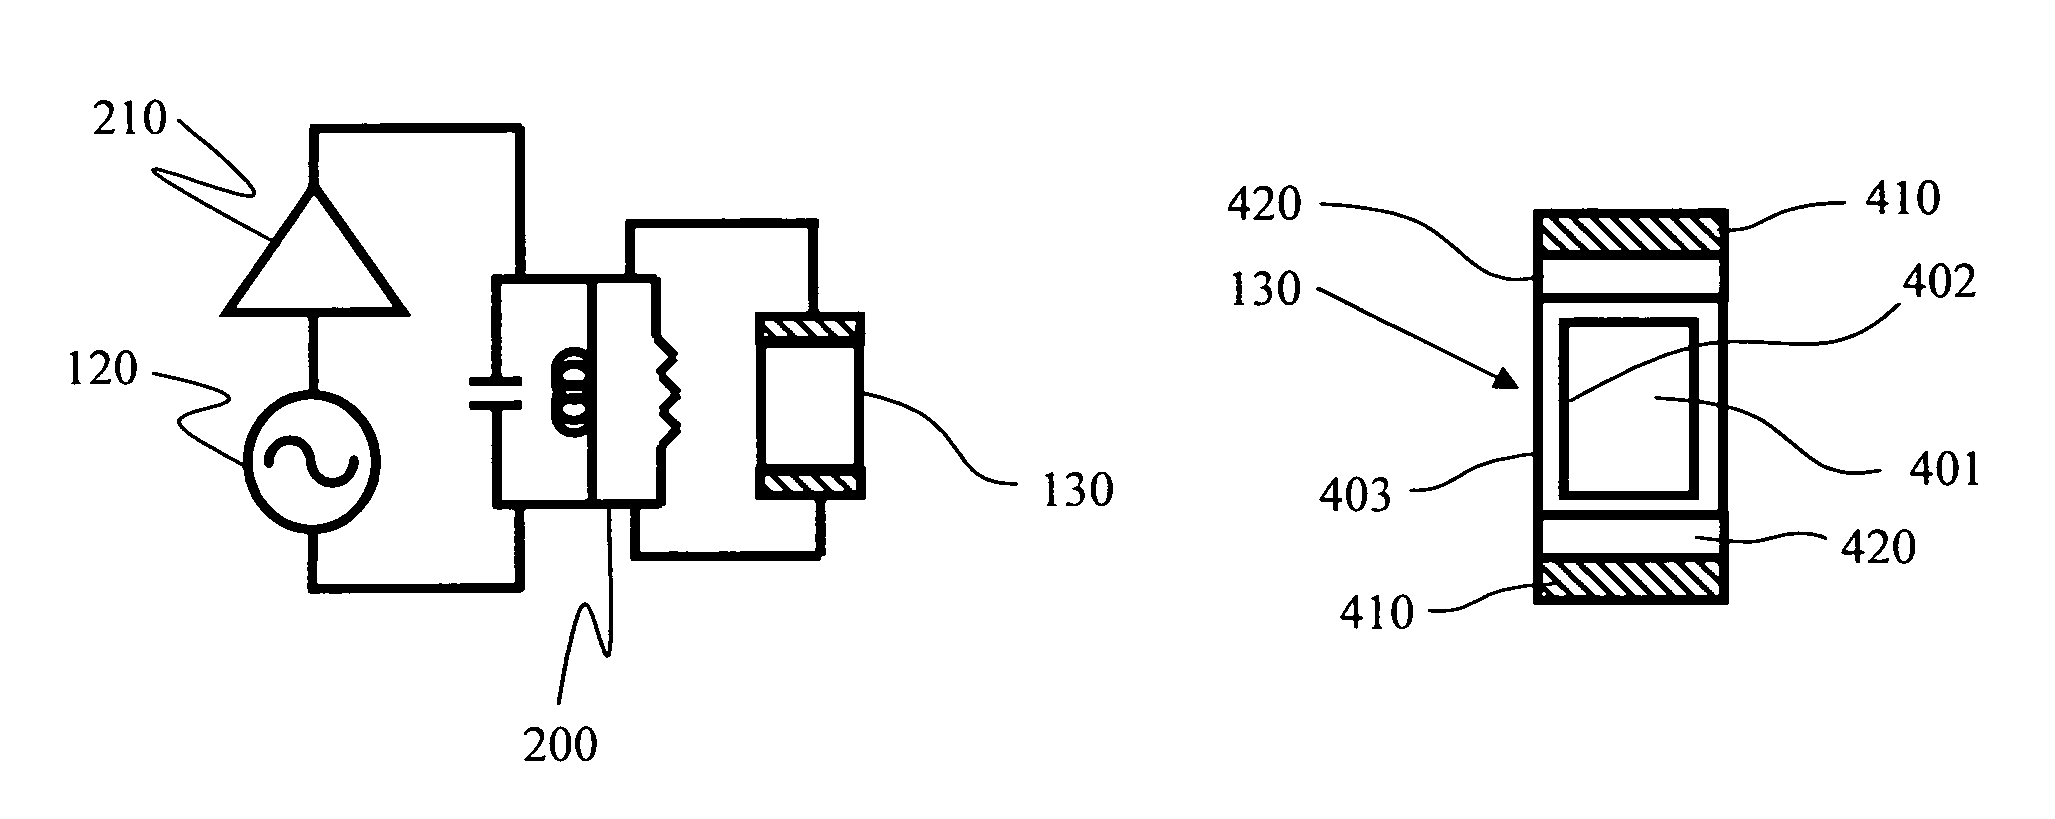 External resonator electrode-less plasma lamp and method of exciting with radio-frequency energy